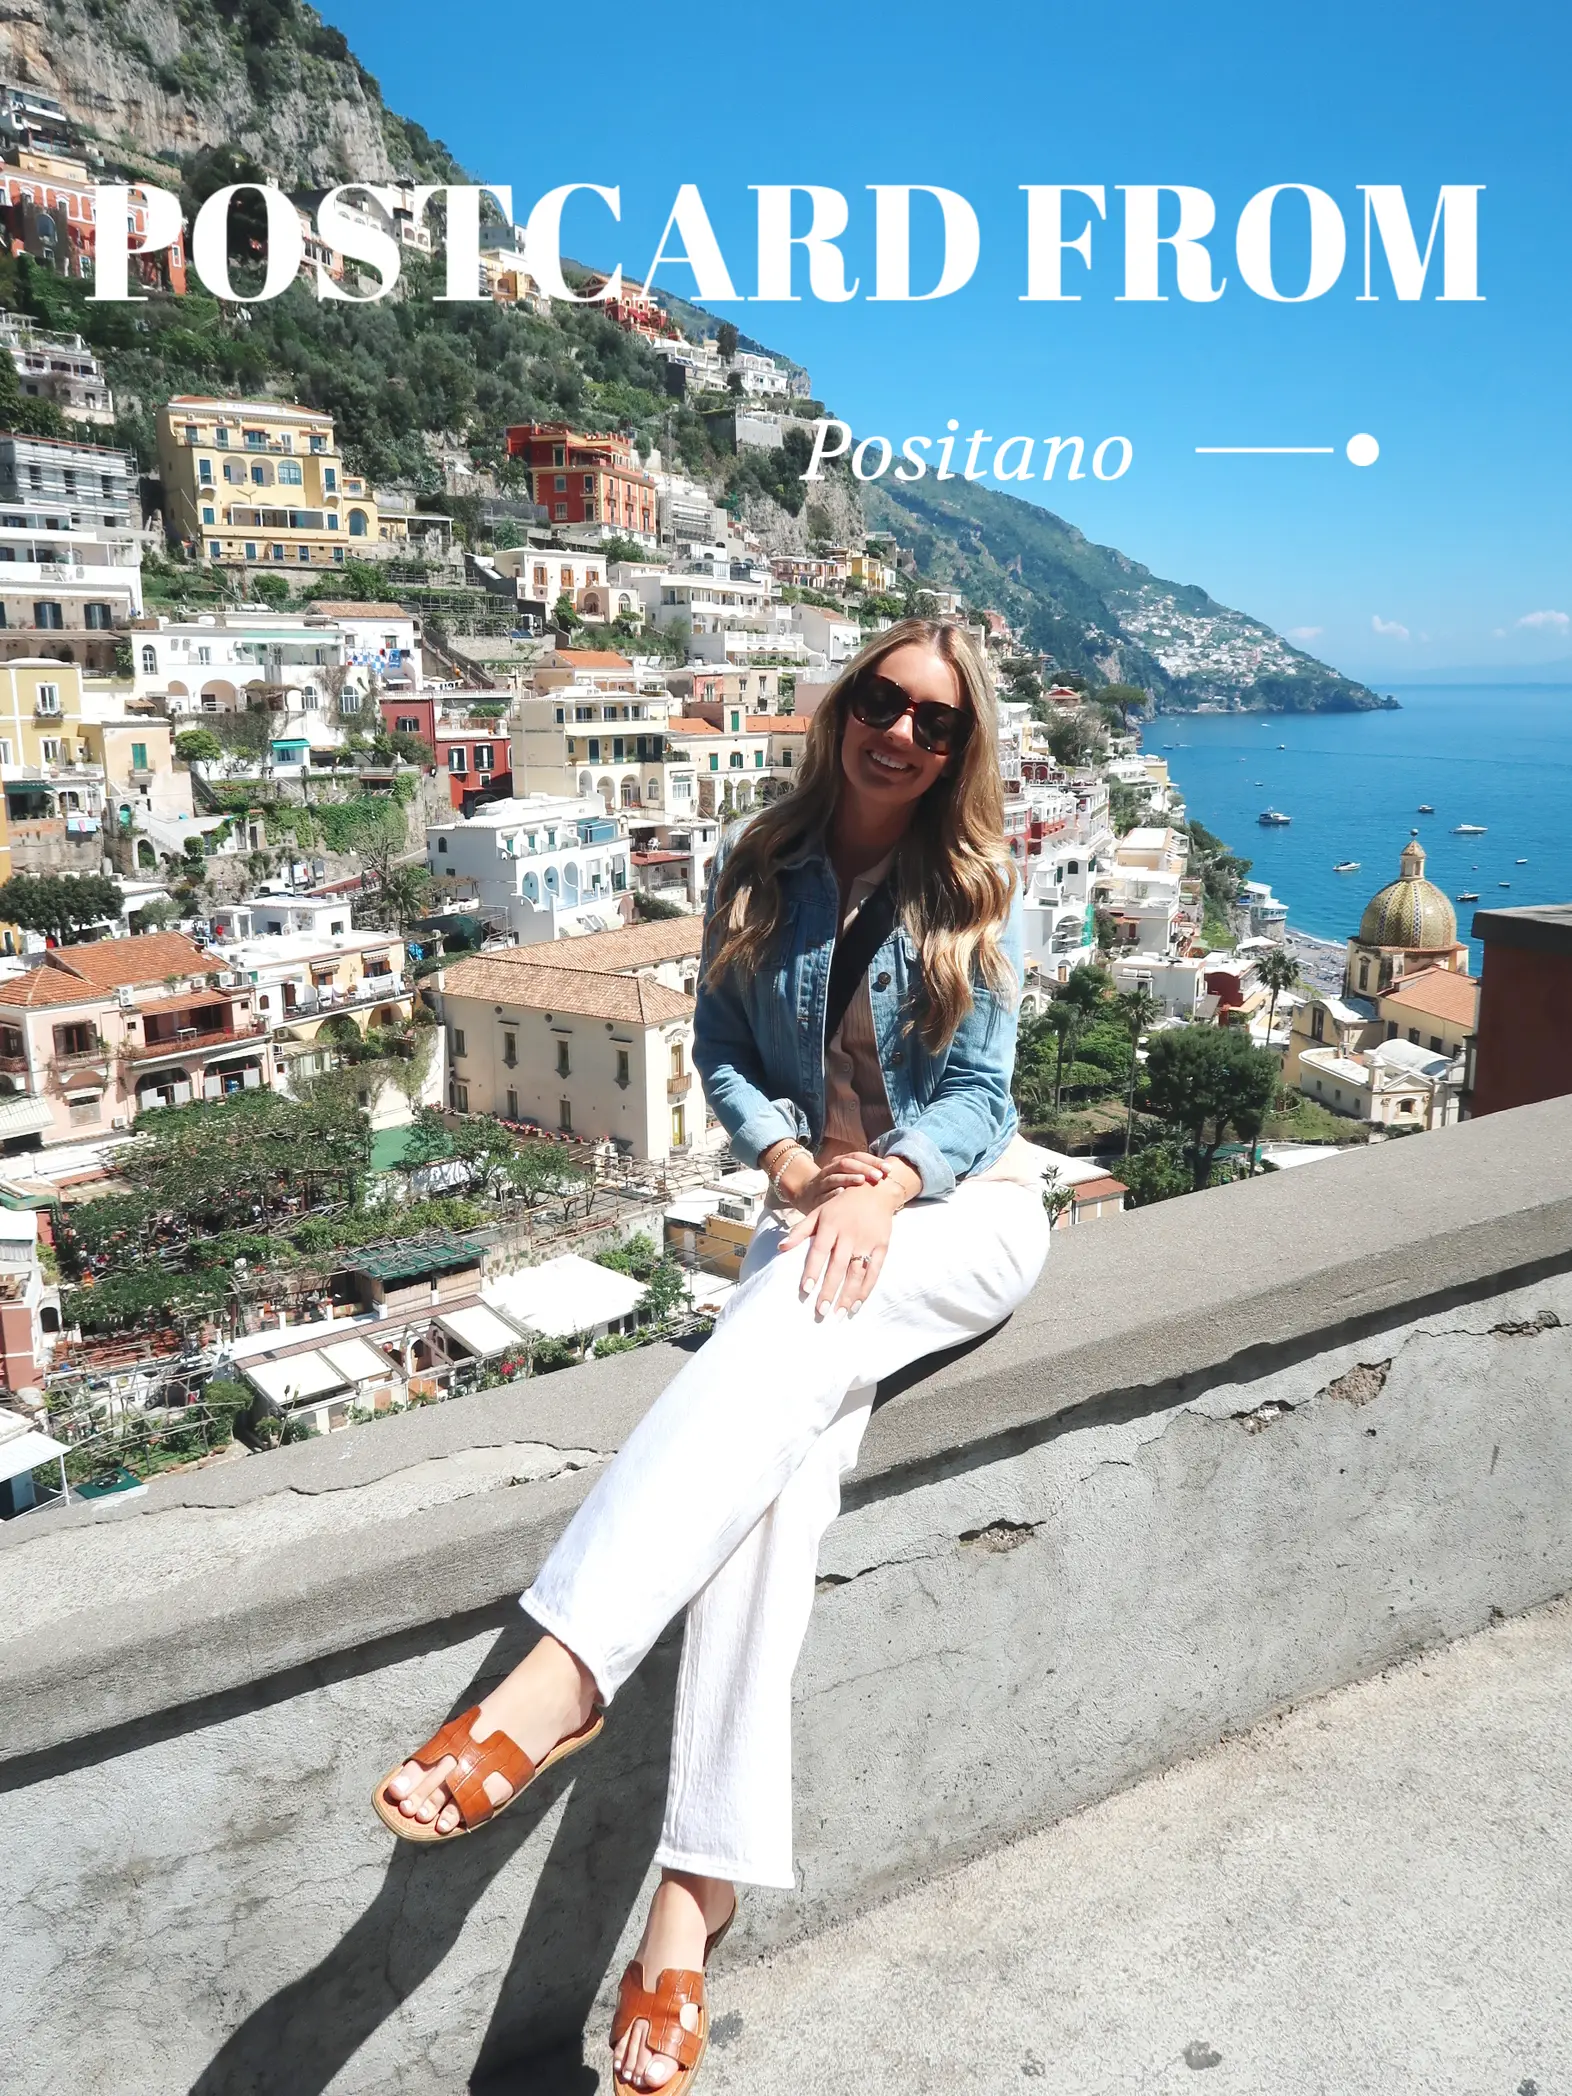 The best things to do in postcard pretty Positano, Italy